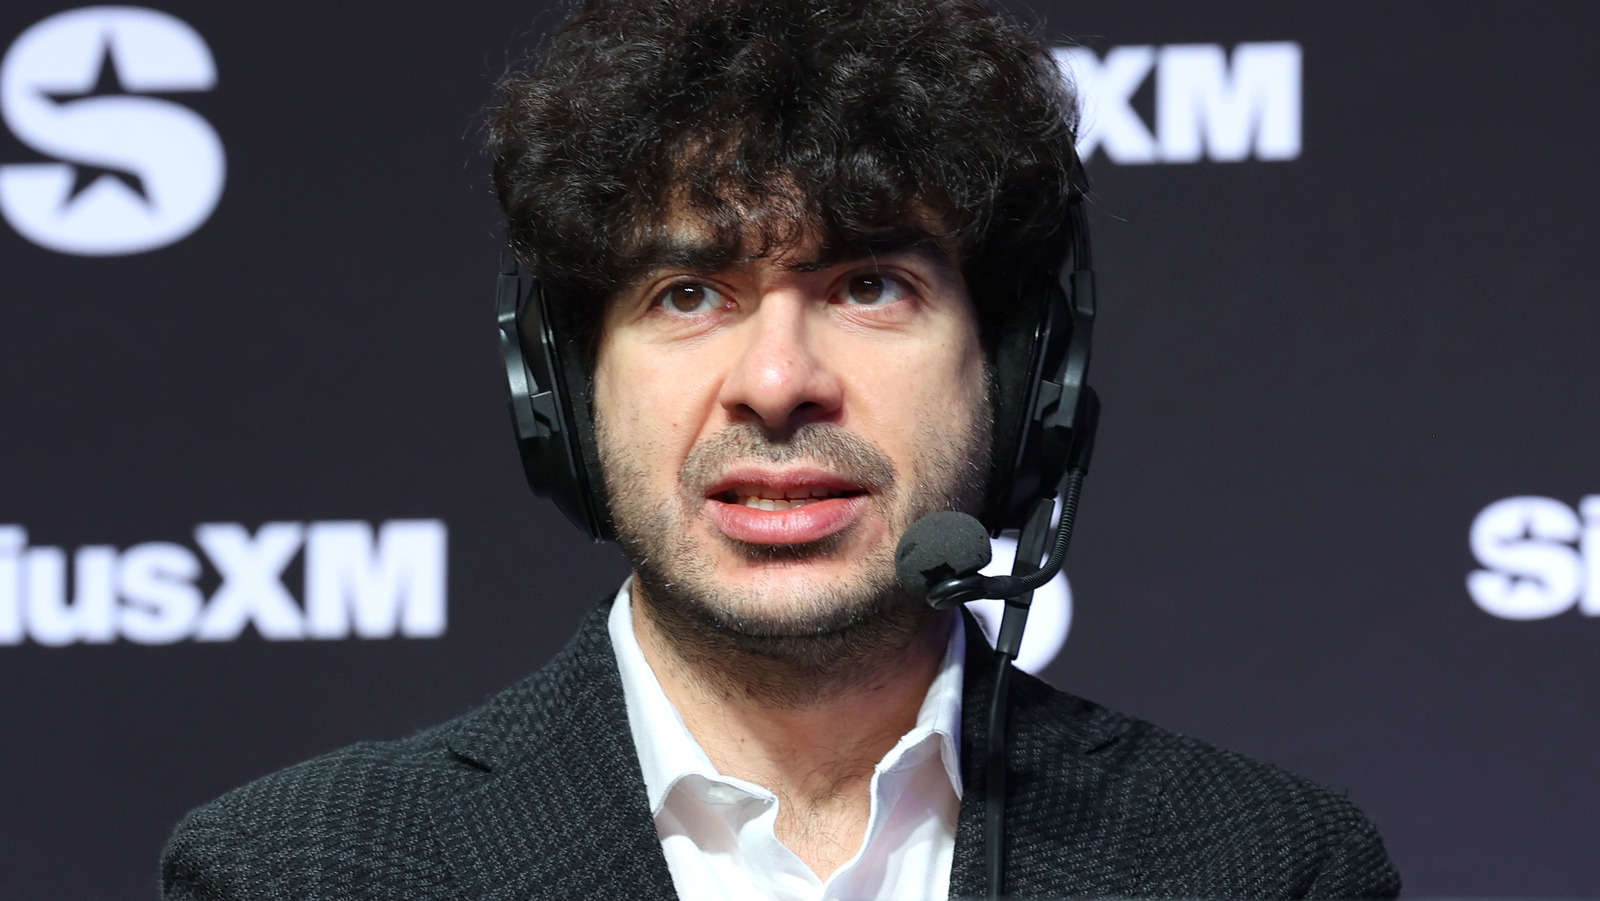 Tony Khan On Possibility Of Jacksonville Jaguars Players Getting Involved In AEW